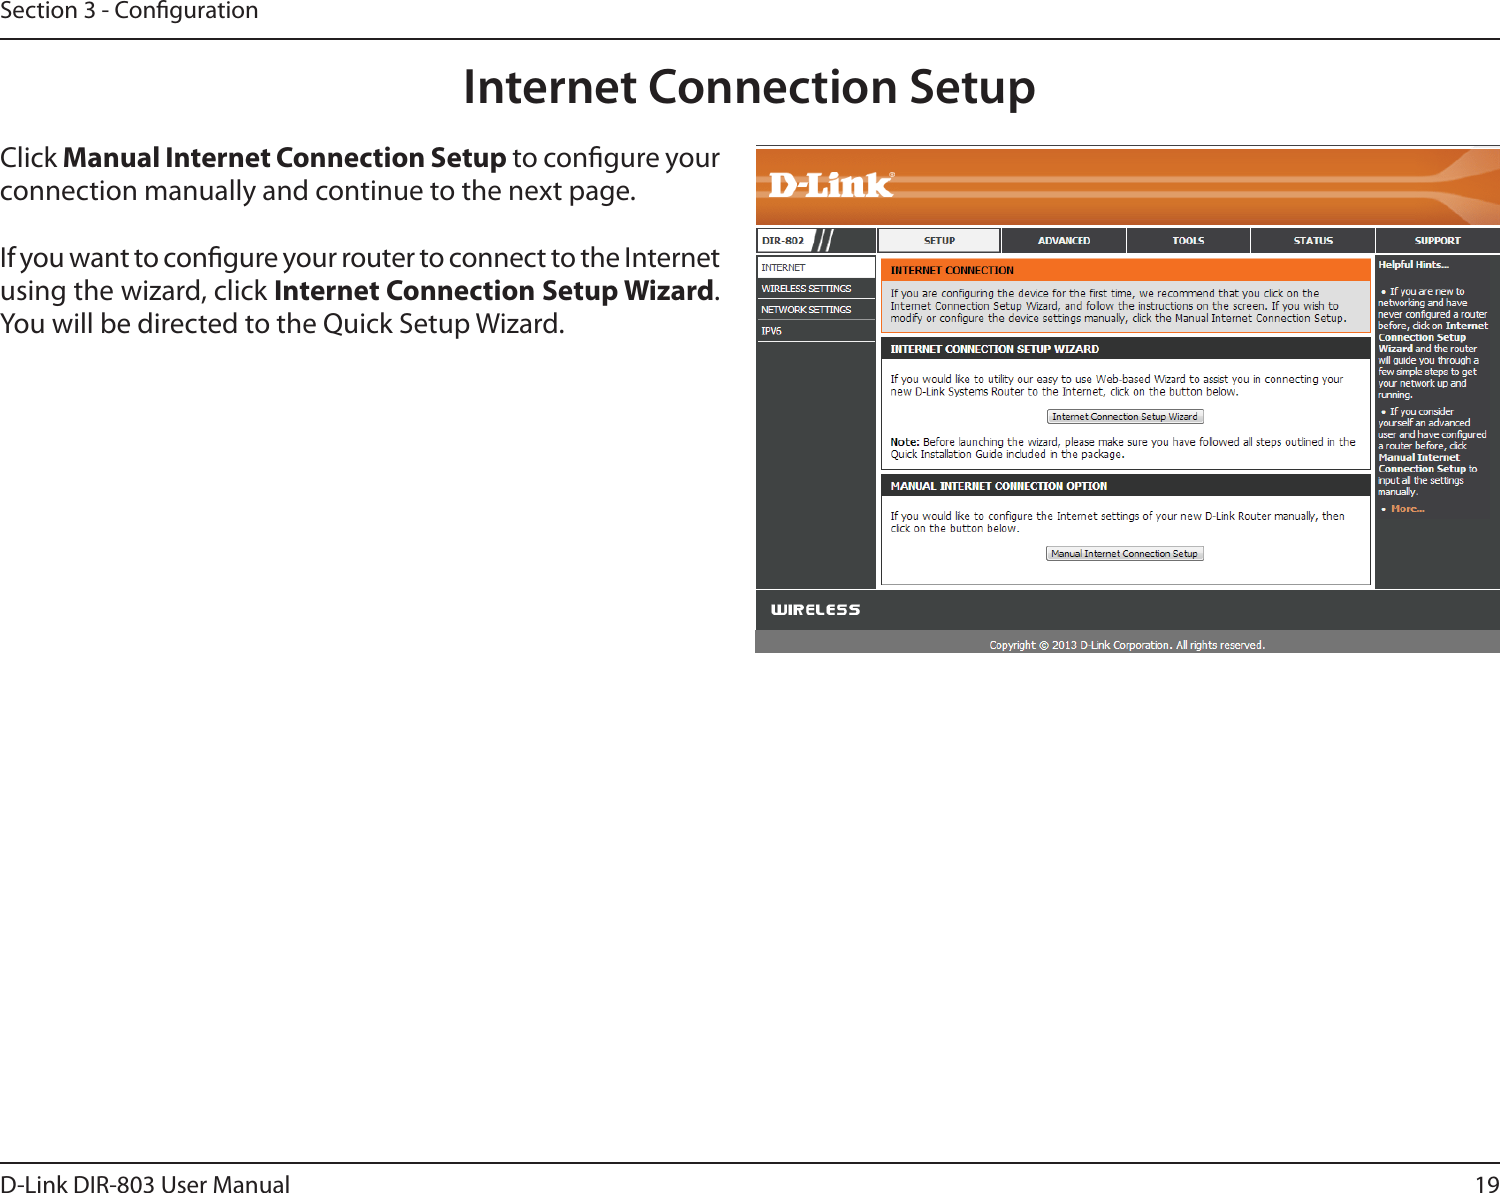 19D-Link DIR-803 User ManualSection 3 - CongurationInternet Connection SetupClick Manual Internet Connection Setup to congure your connection manually and continue to the next page.If you want to congure your router to connect to the Internet using the wizard, click Internet Connection Setup Wizard. You will be directed to the Quick Setup Wizard. 